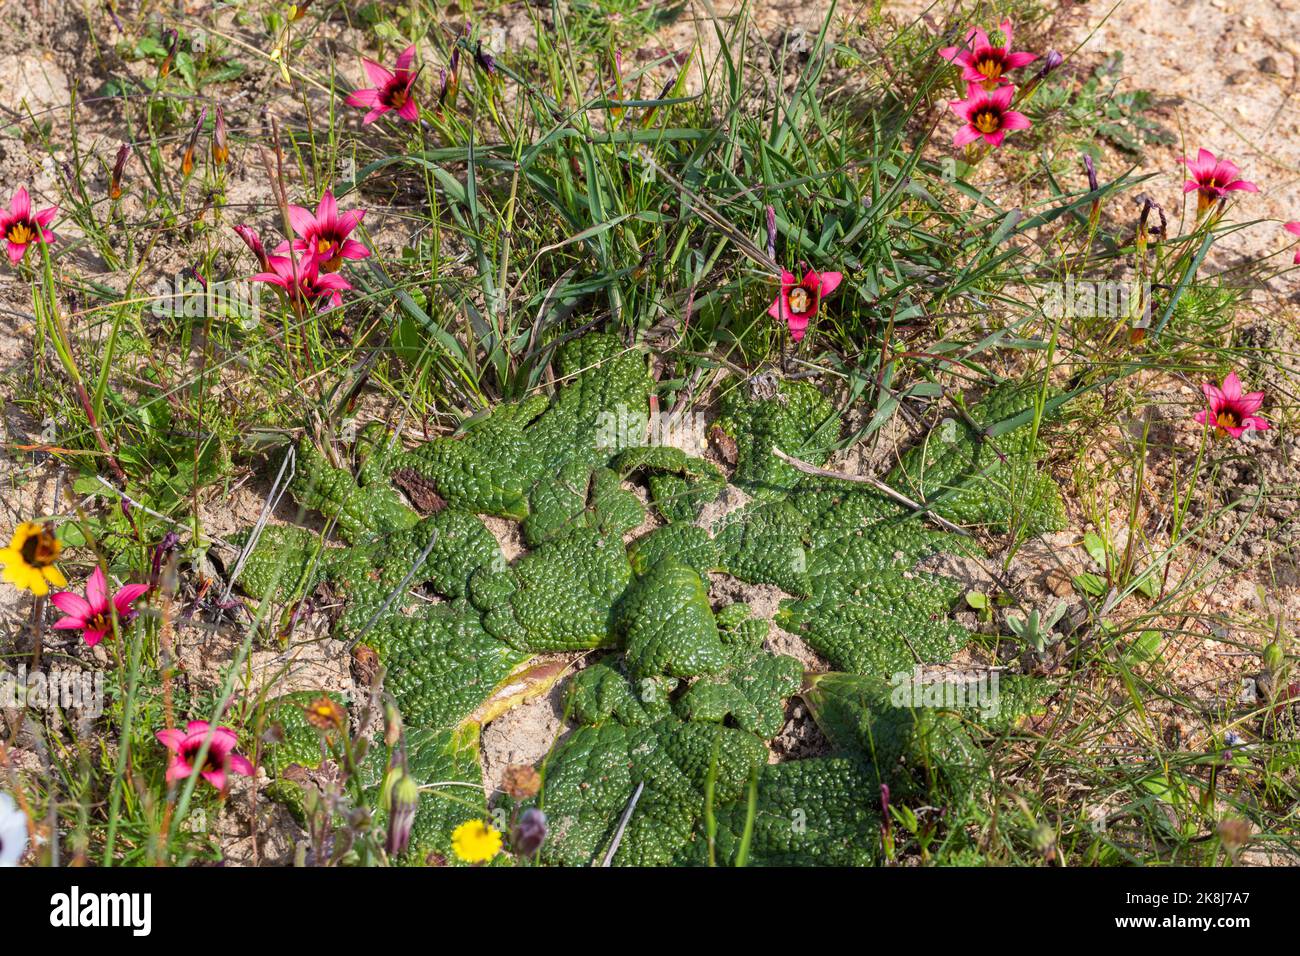 South African Wildflower: The flat leaves of the endemic Arctopus sp. and flowers of Romulea eximia in nature in the Western Cape of South Africa Stock Photo